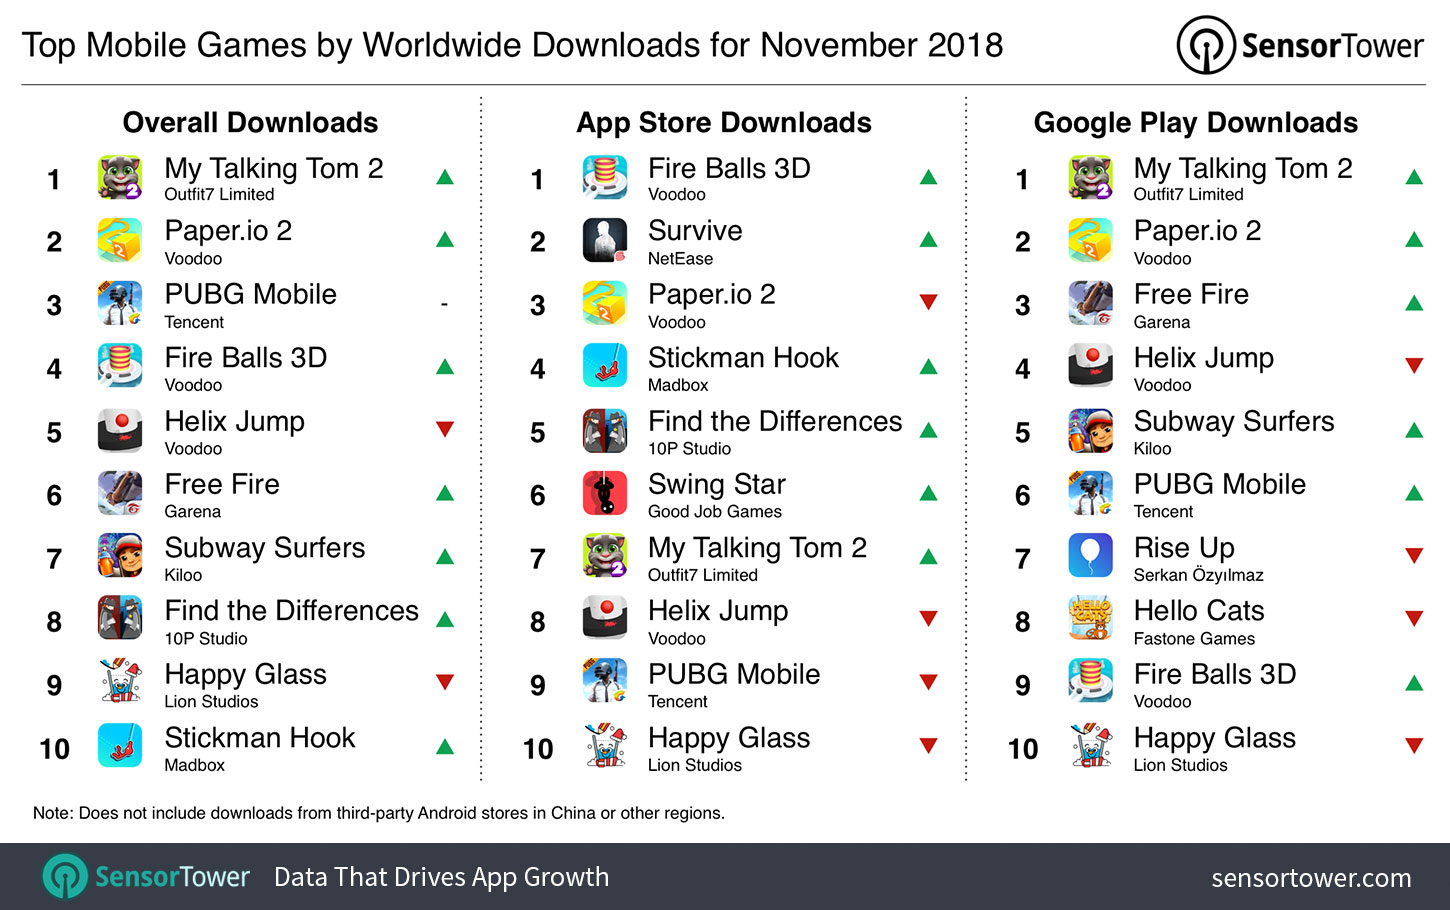 Top Mobile Games by Downloads for November 2018